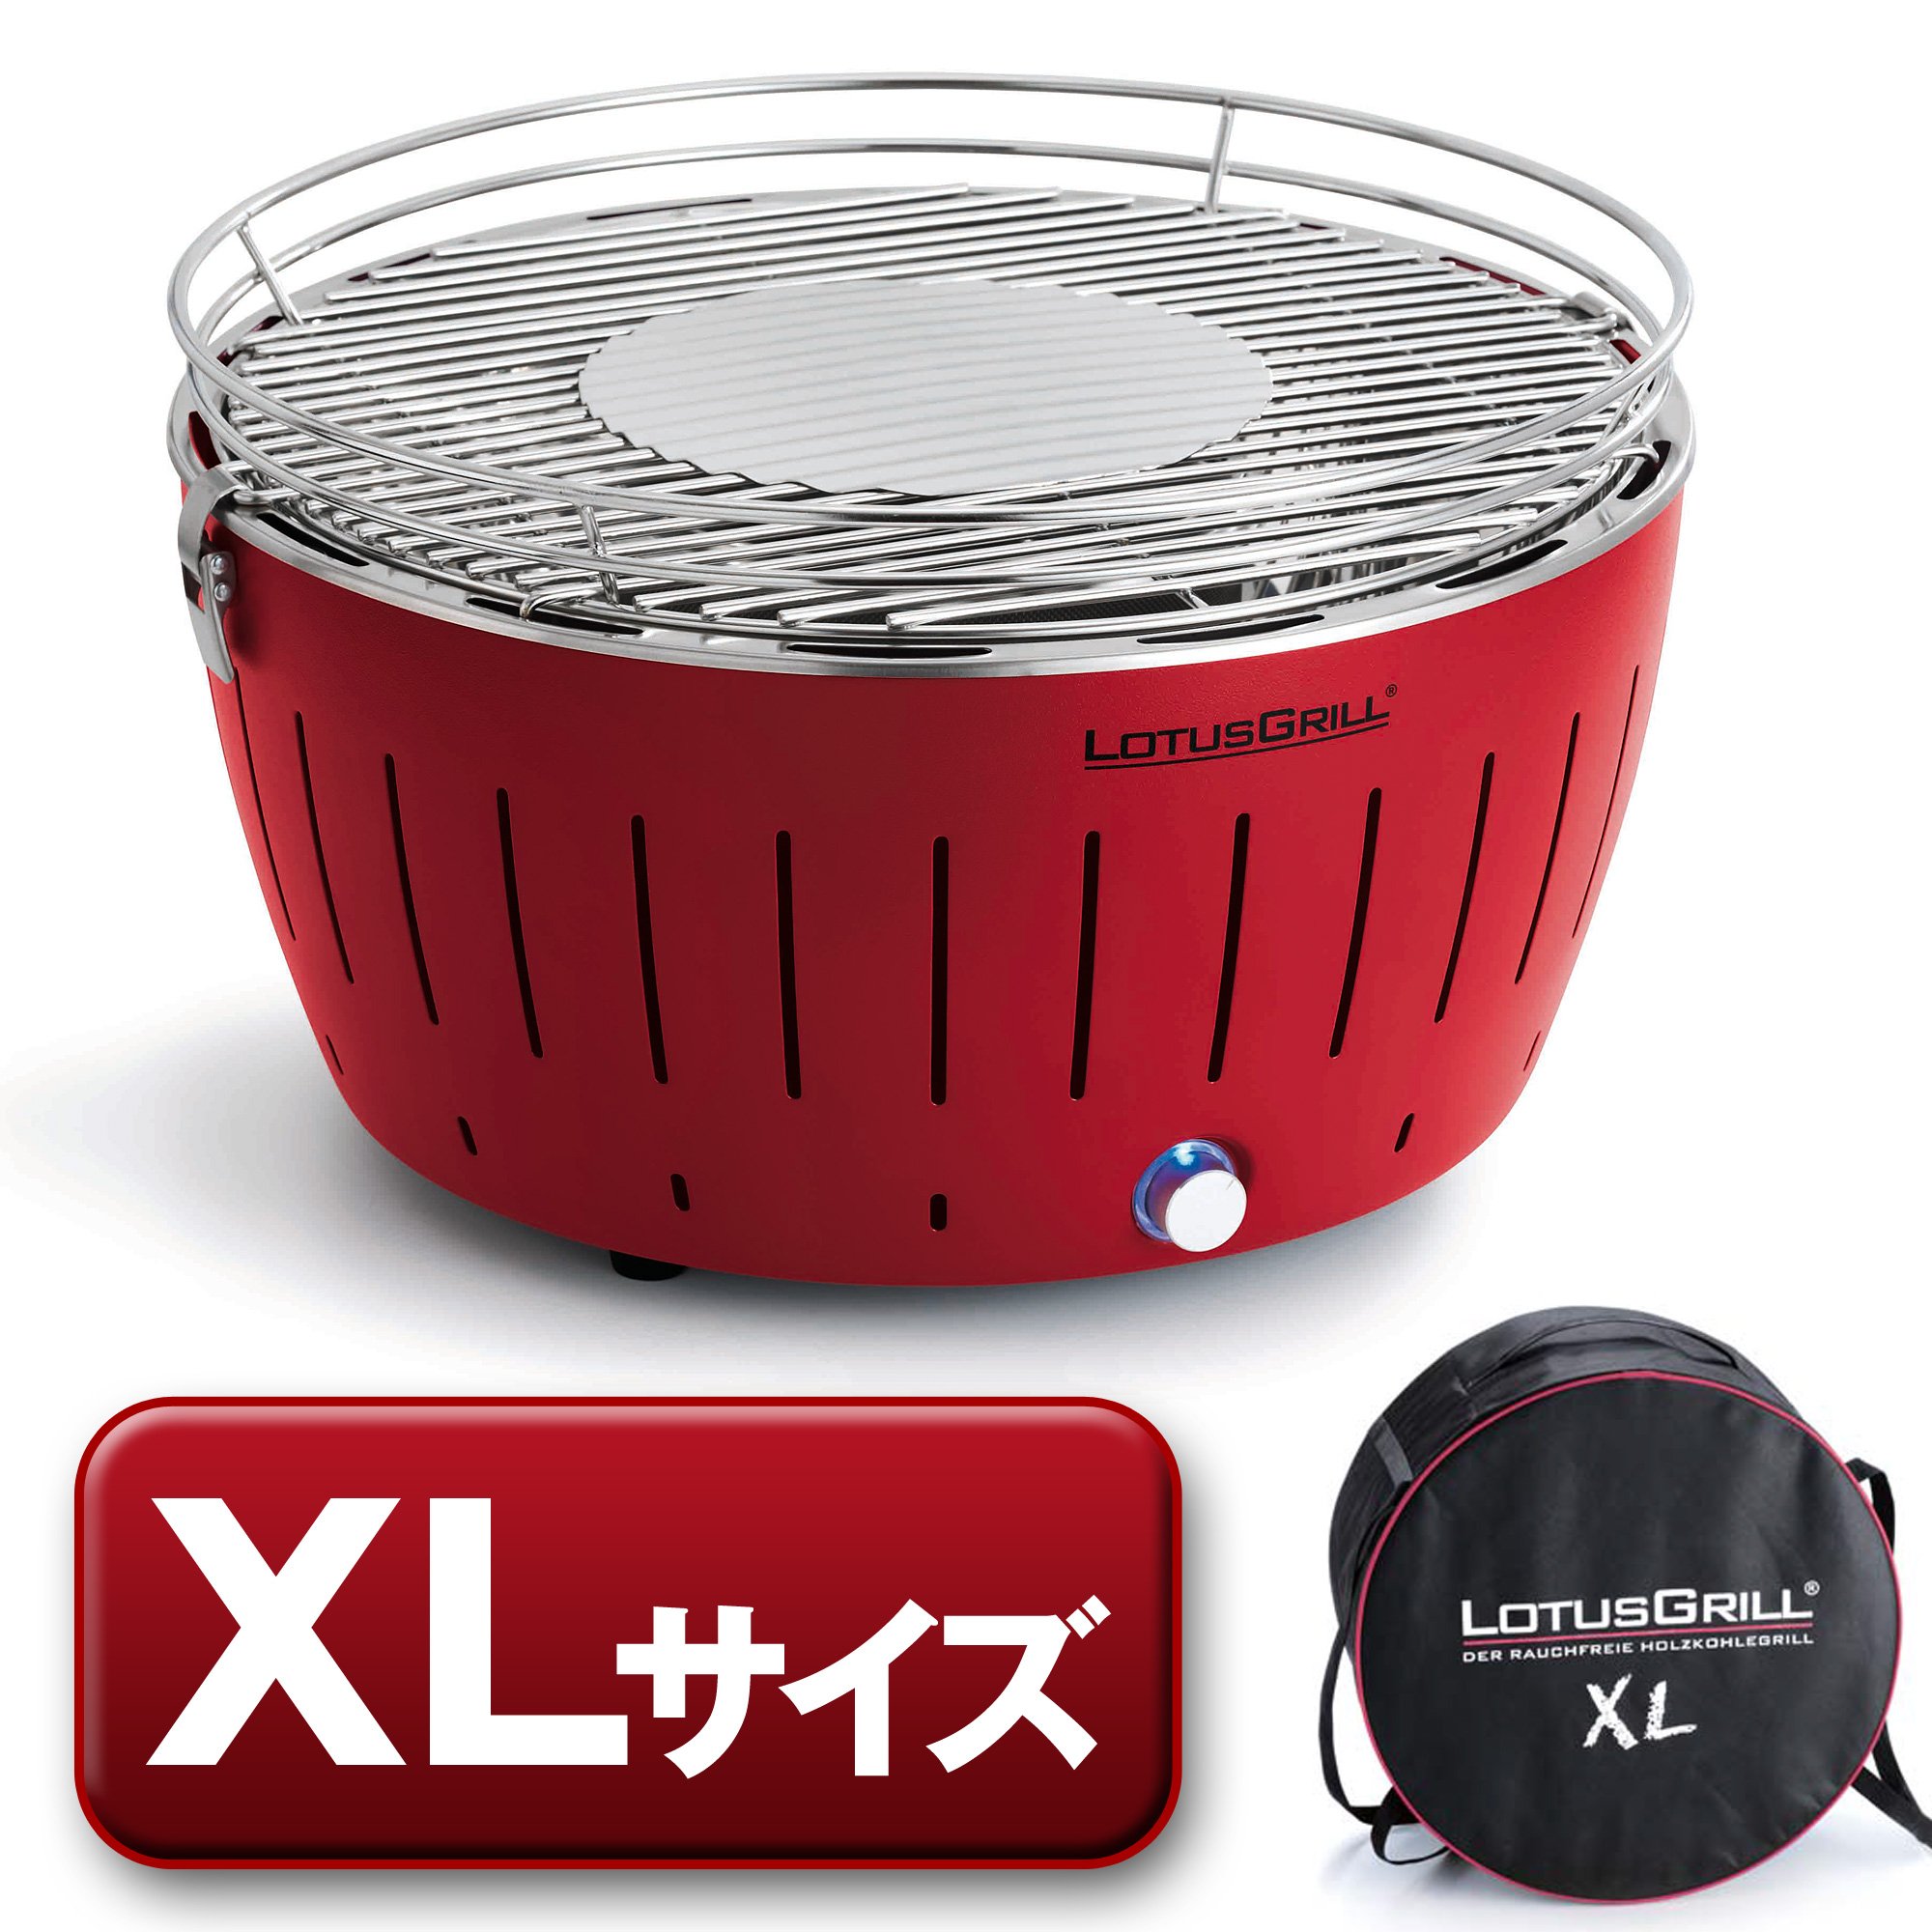 LotusGrill Holzkohlengrill Serie 435 XL, Farbe rot, 43,5 x 43,5 x 29,5